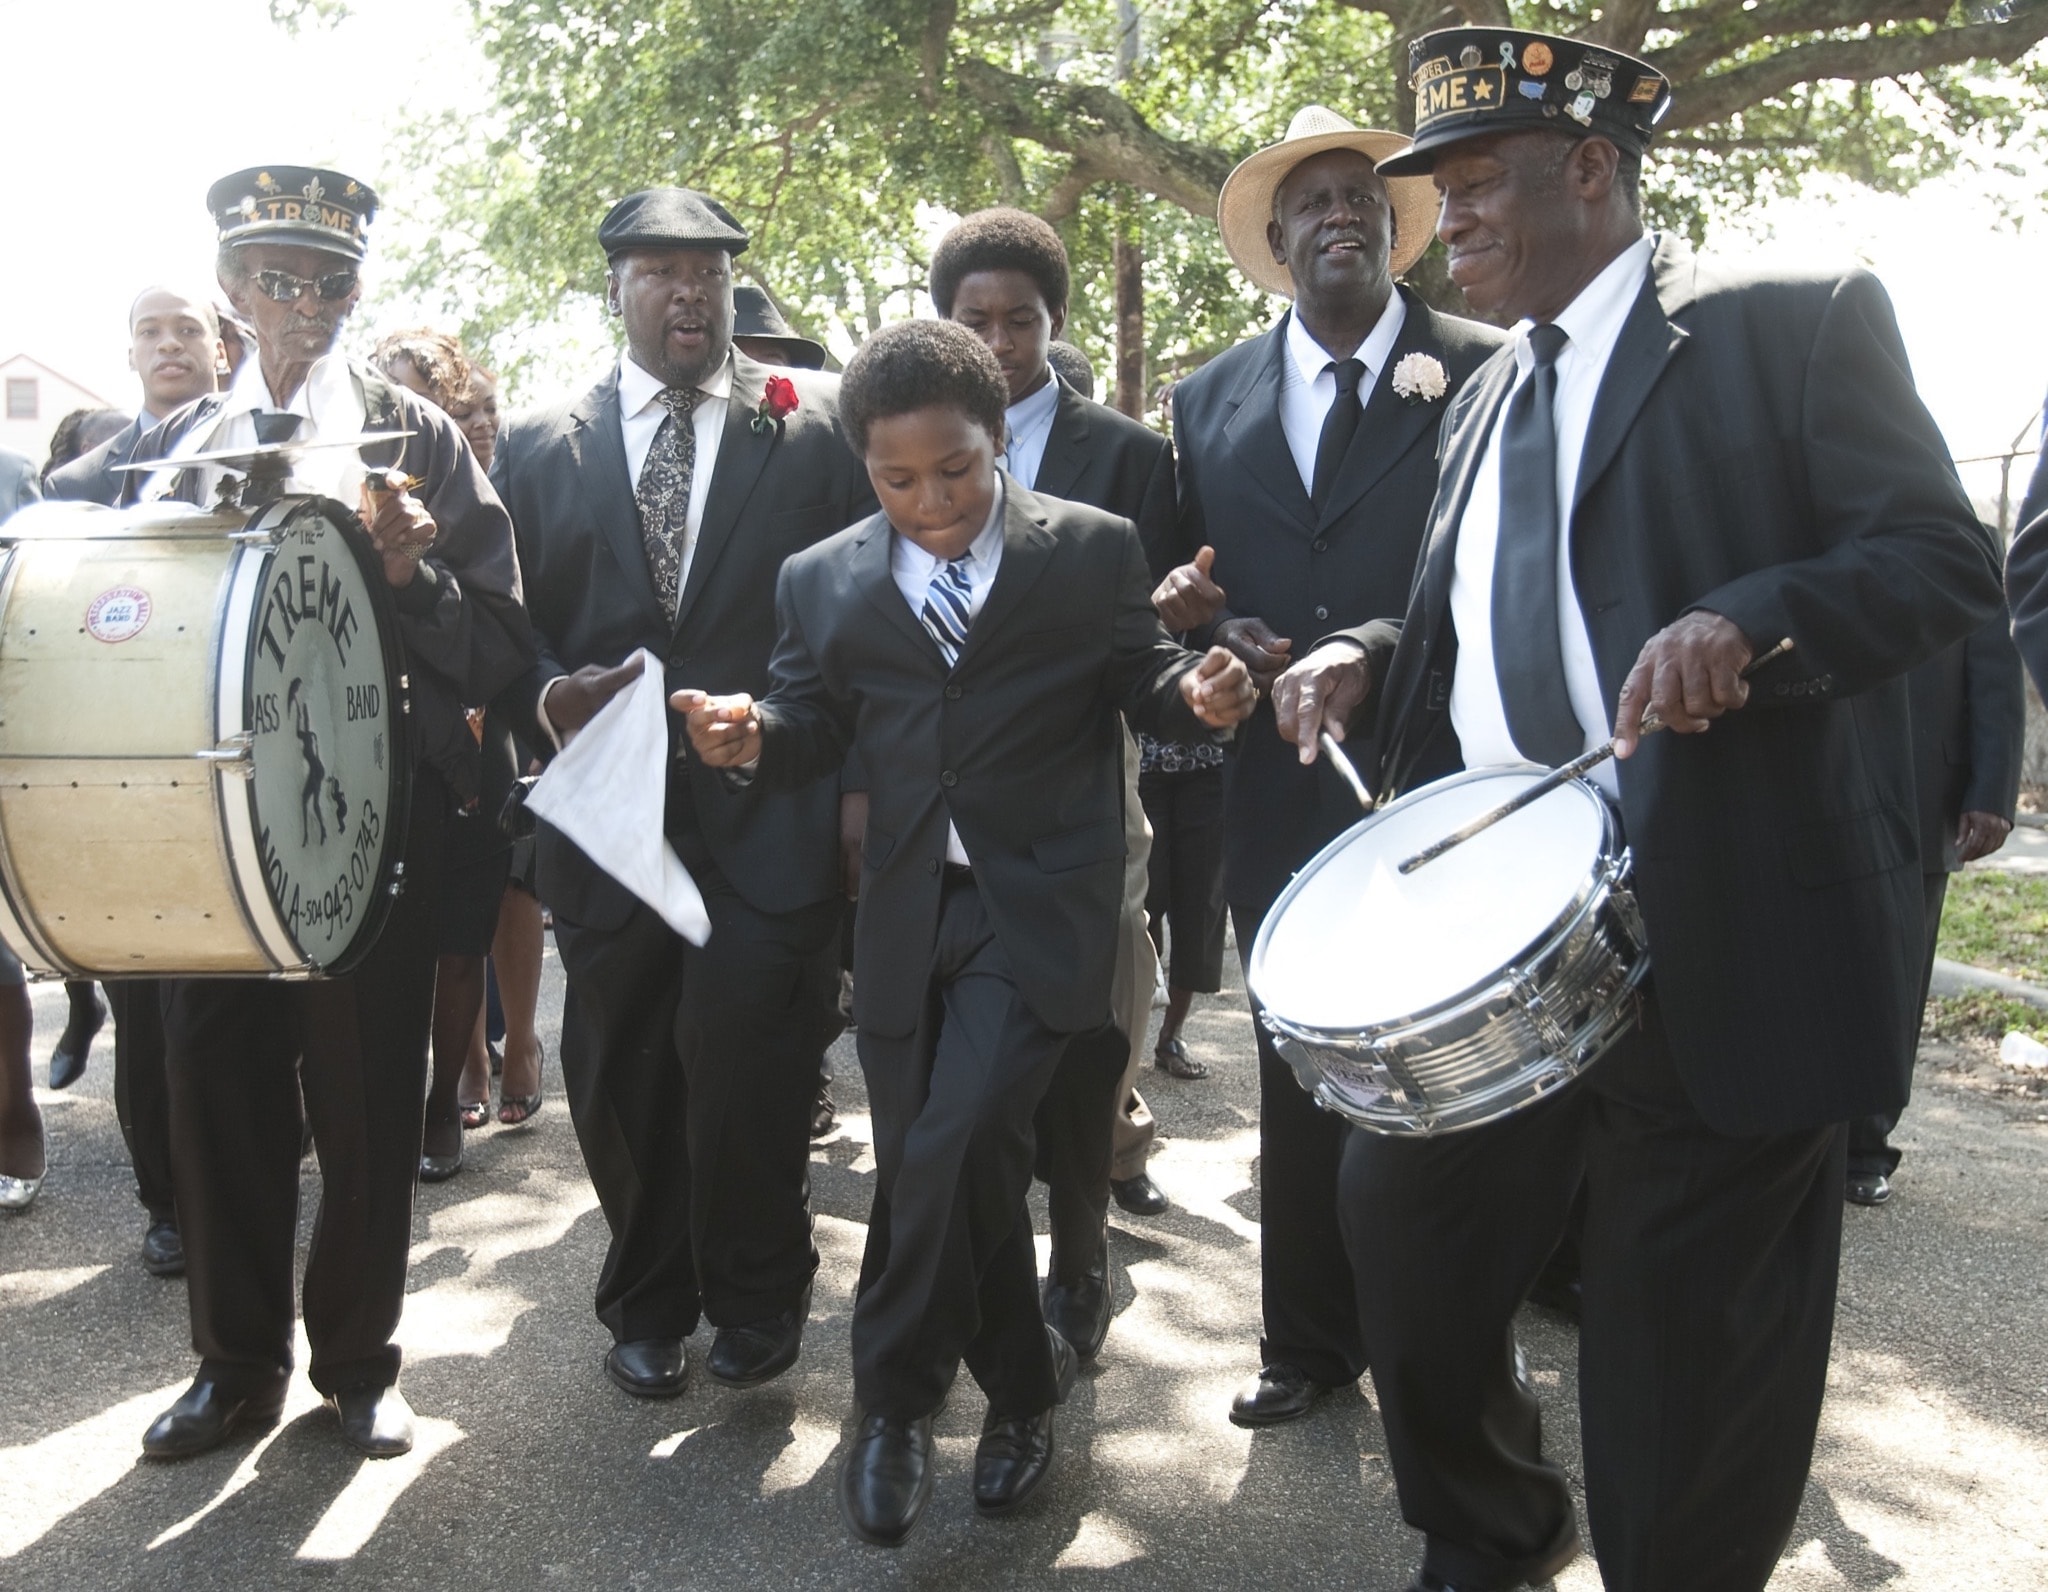 Treme saison 1 épisode Daymo's funeral. Batiste joins the Parada. Alcide and Randall catch up with their father